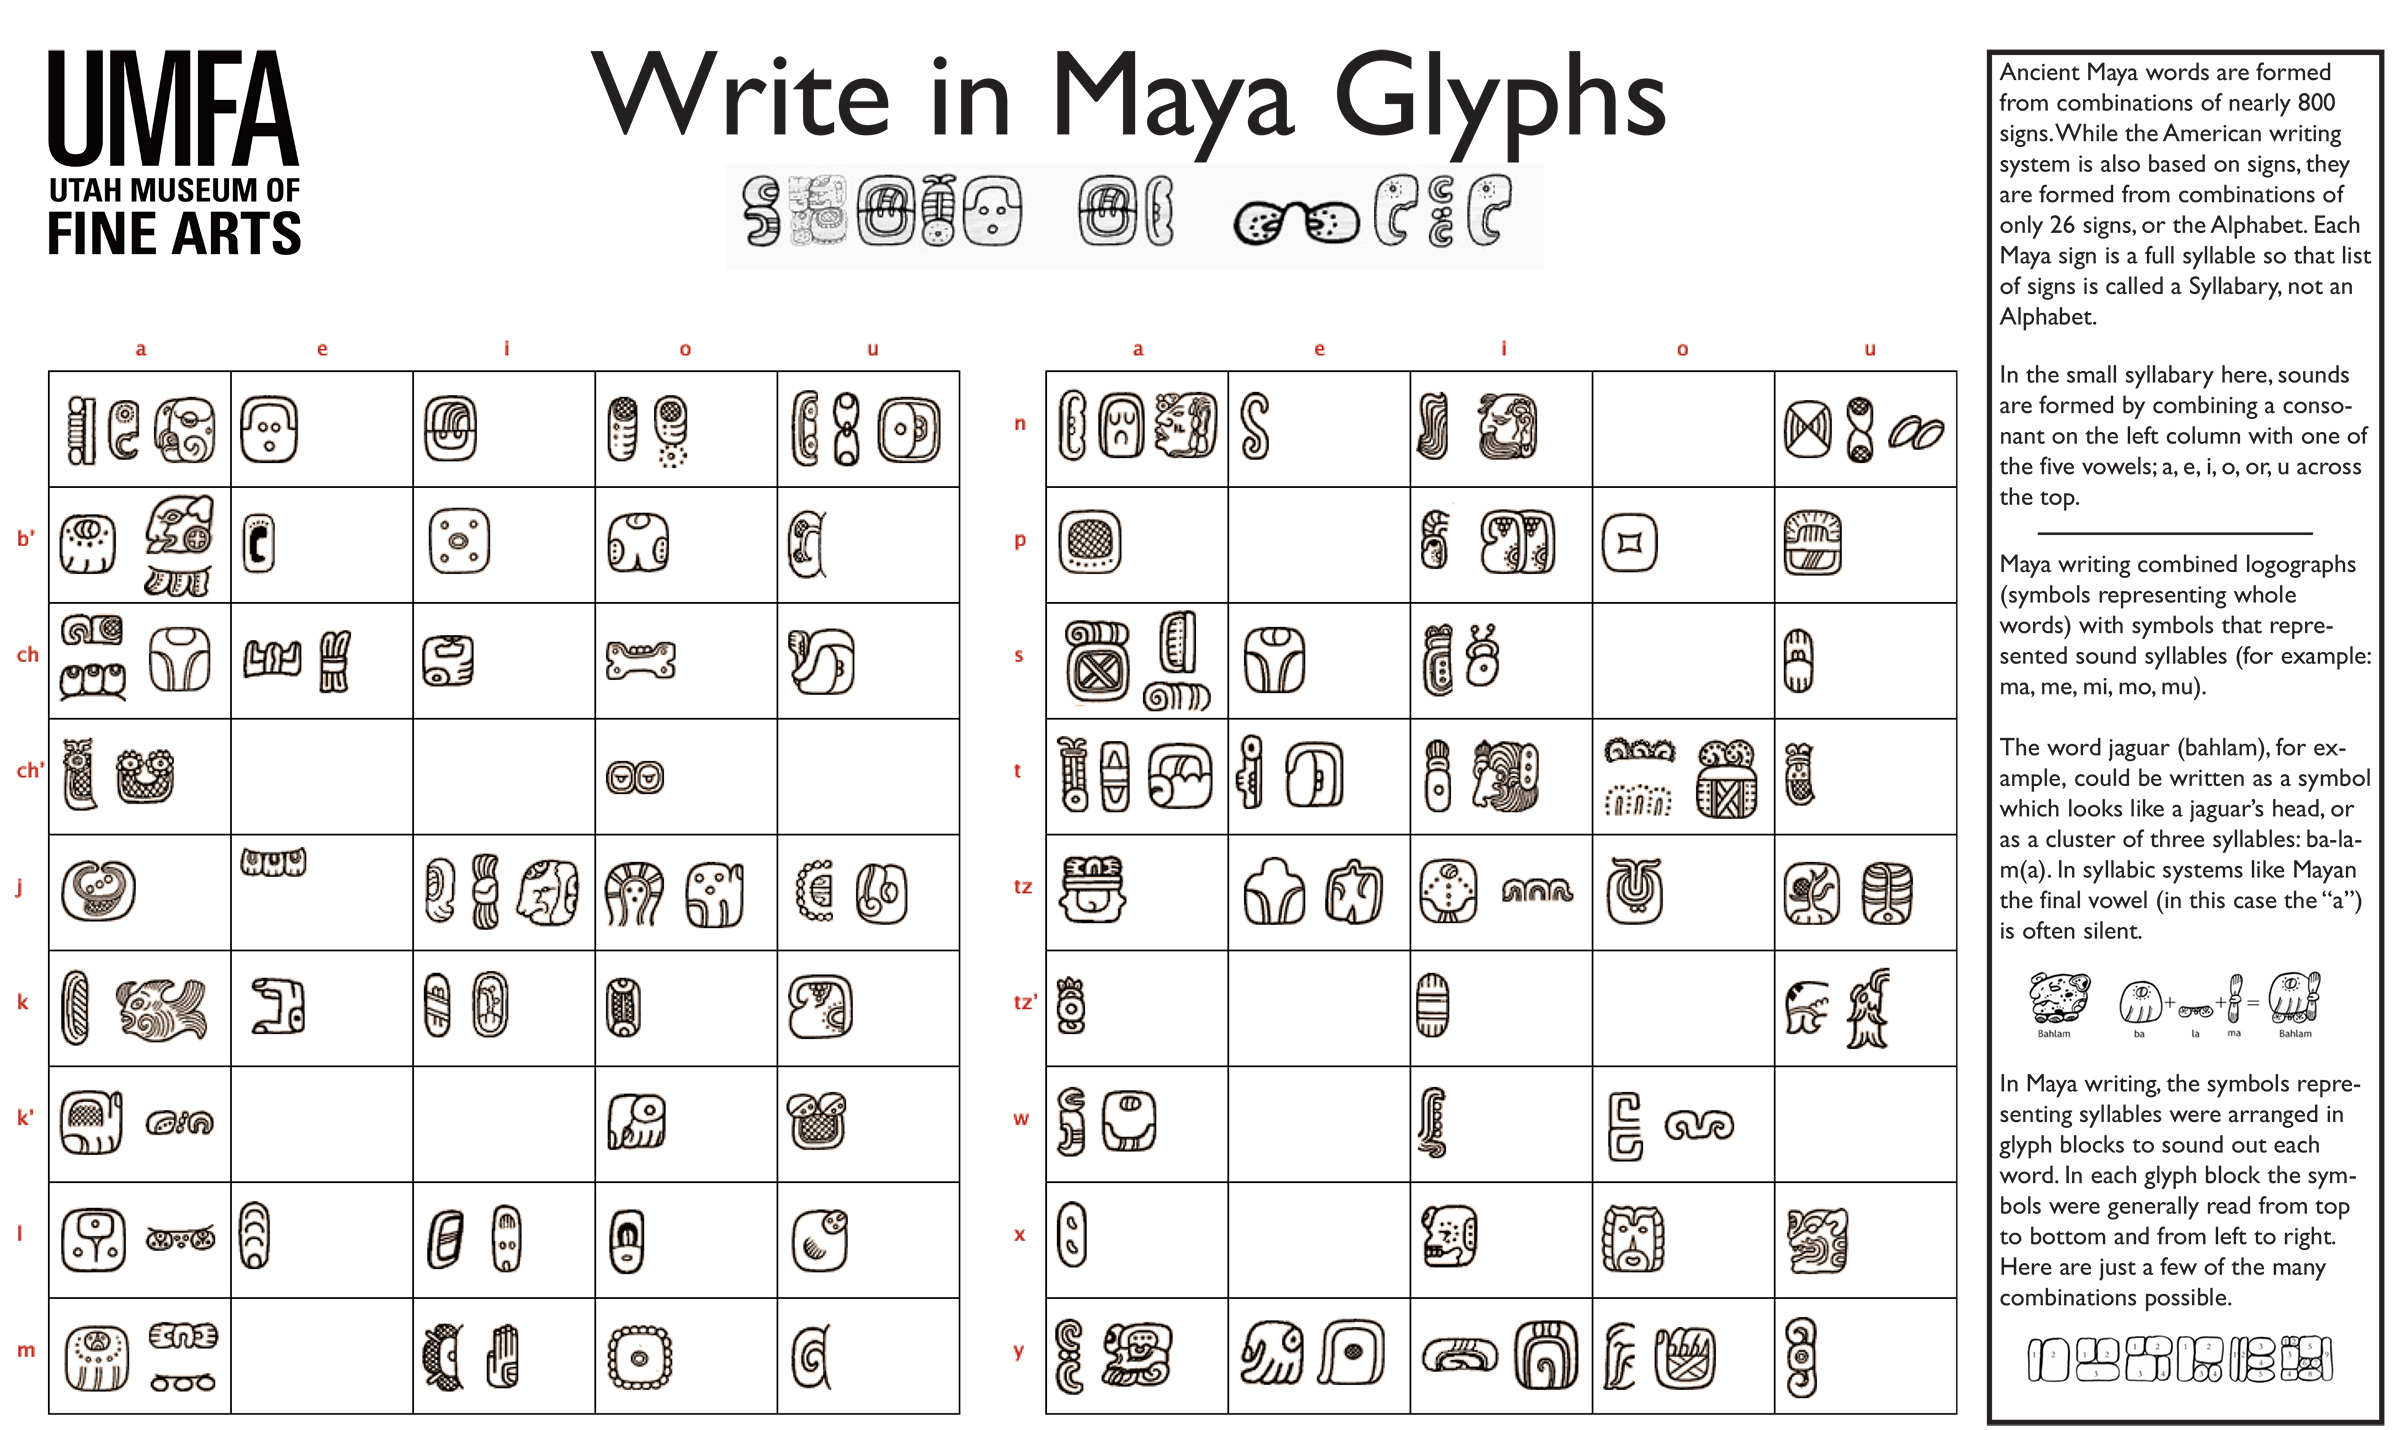 glyph for ancient peoples